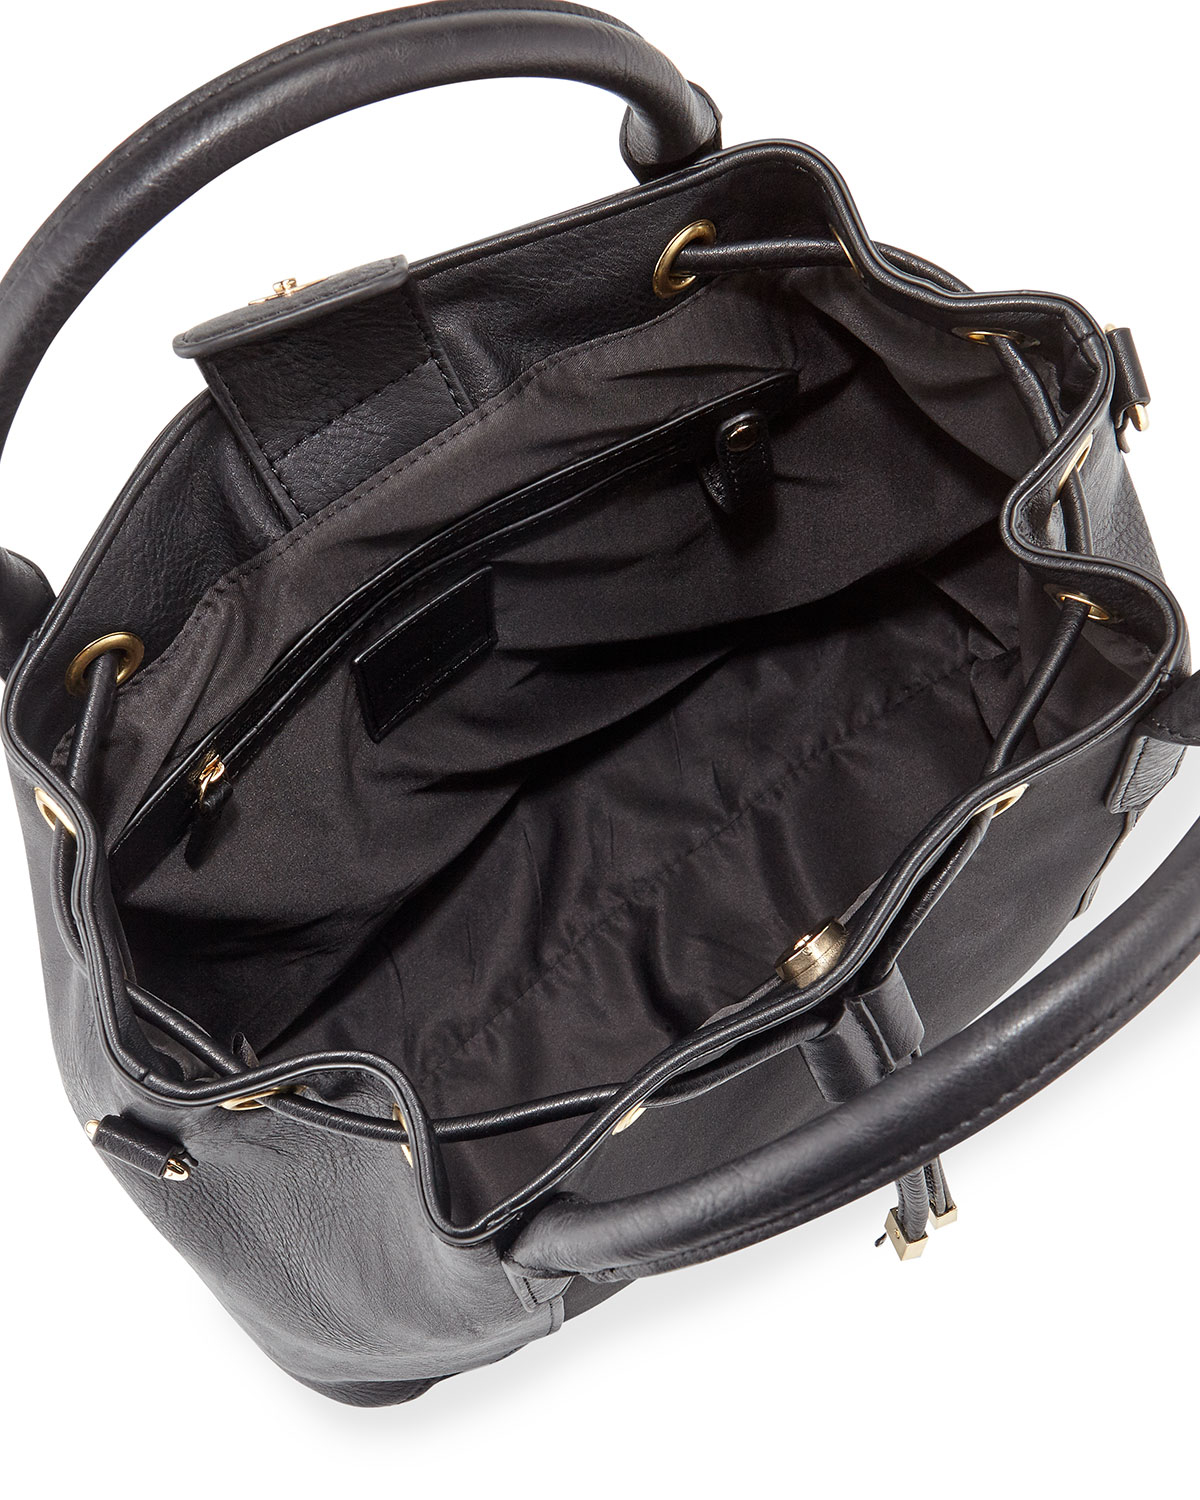 Lyst - Neiman Marcus Jessa Faux-leather Tote Bag in Black